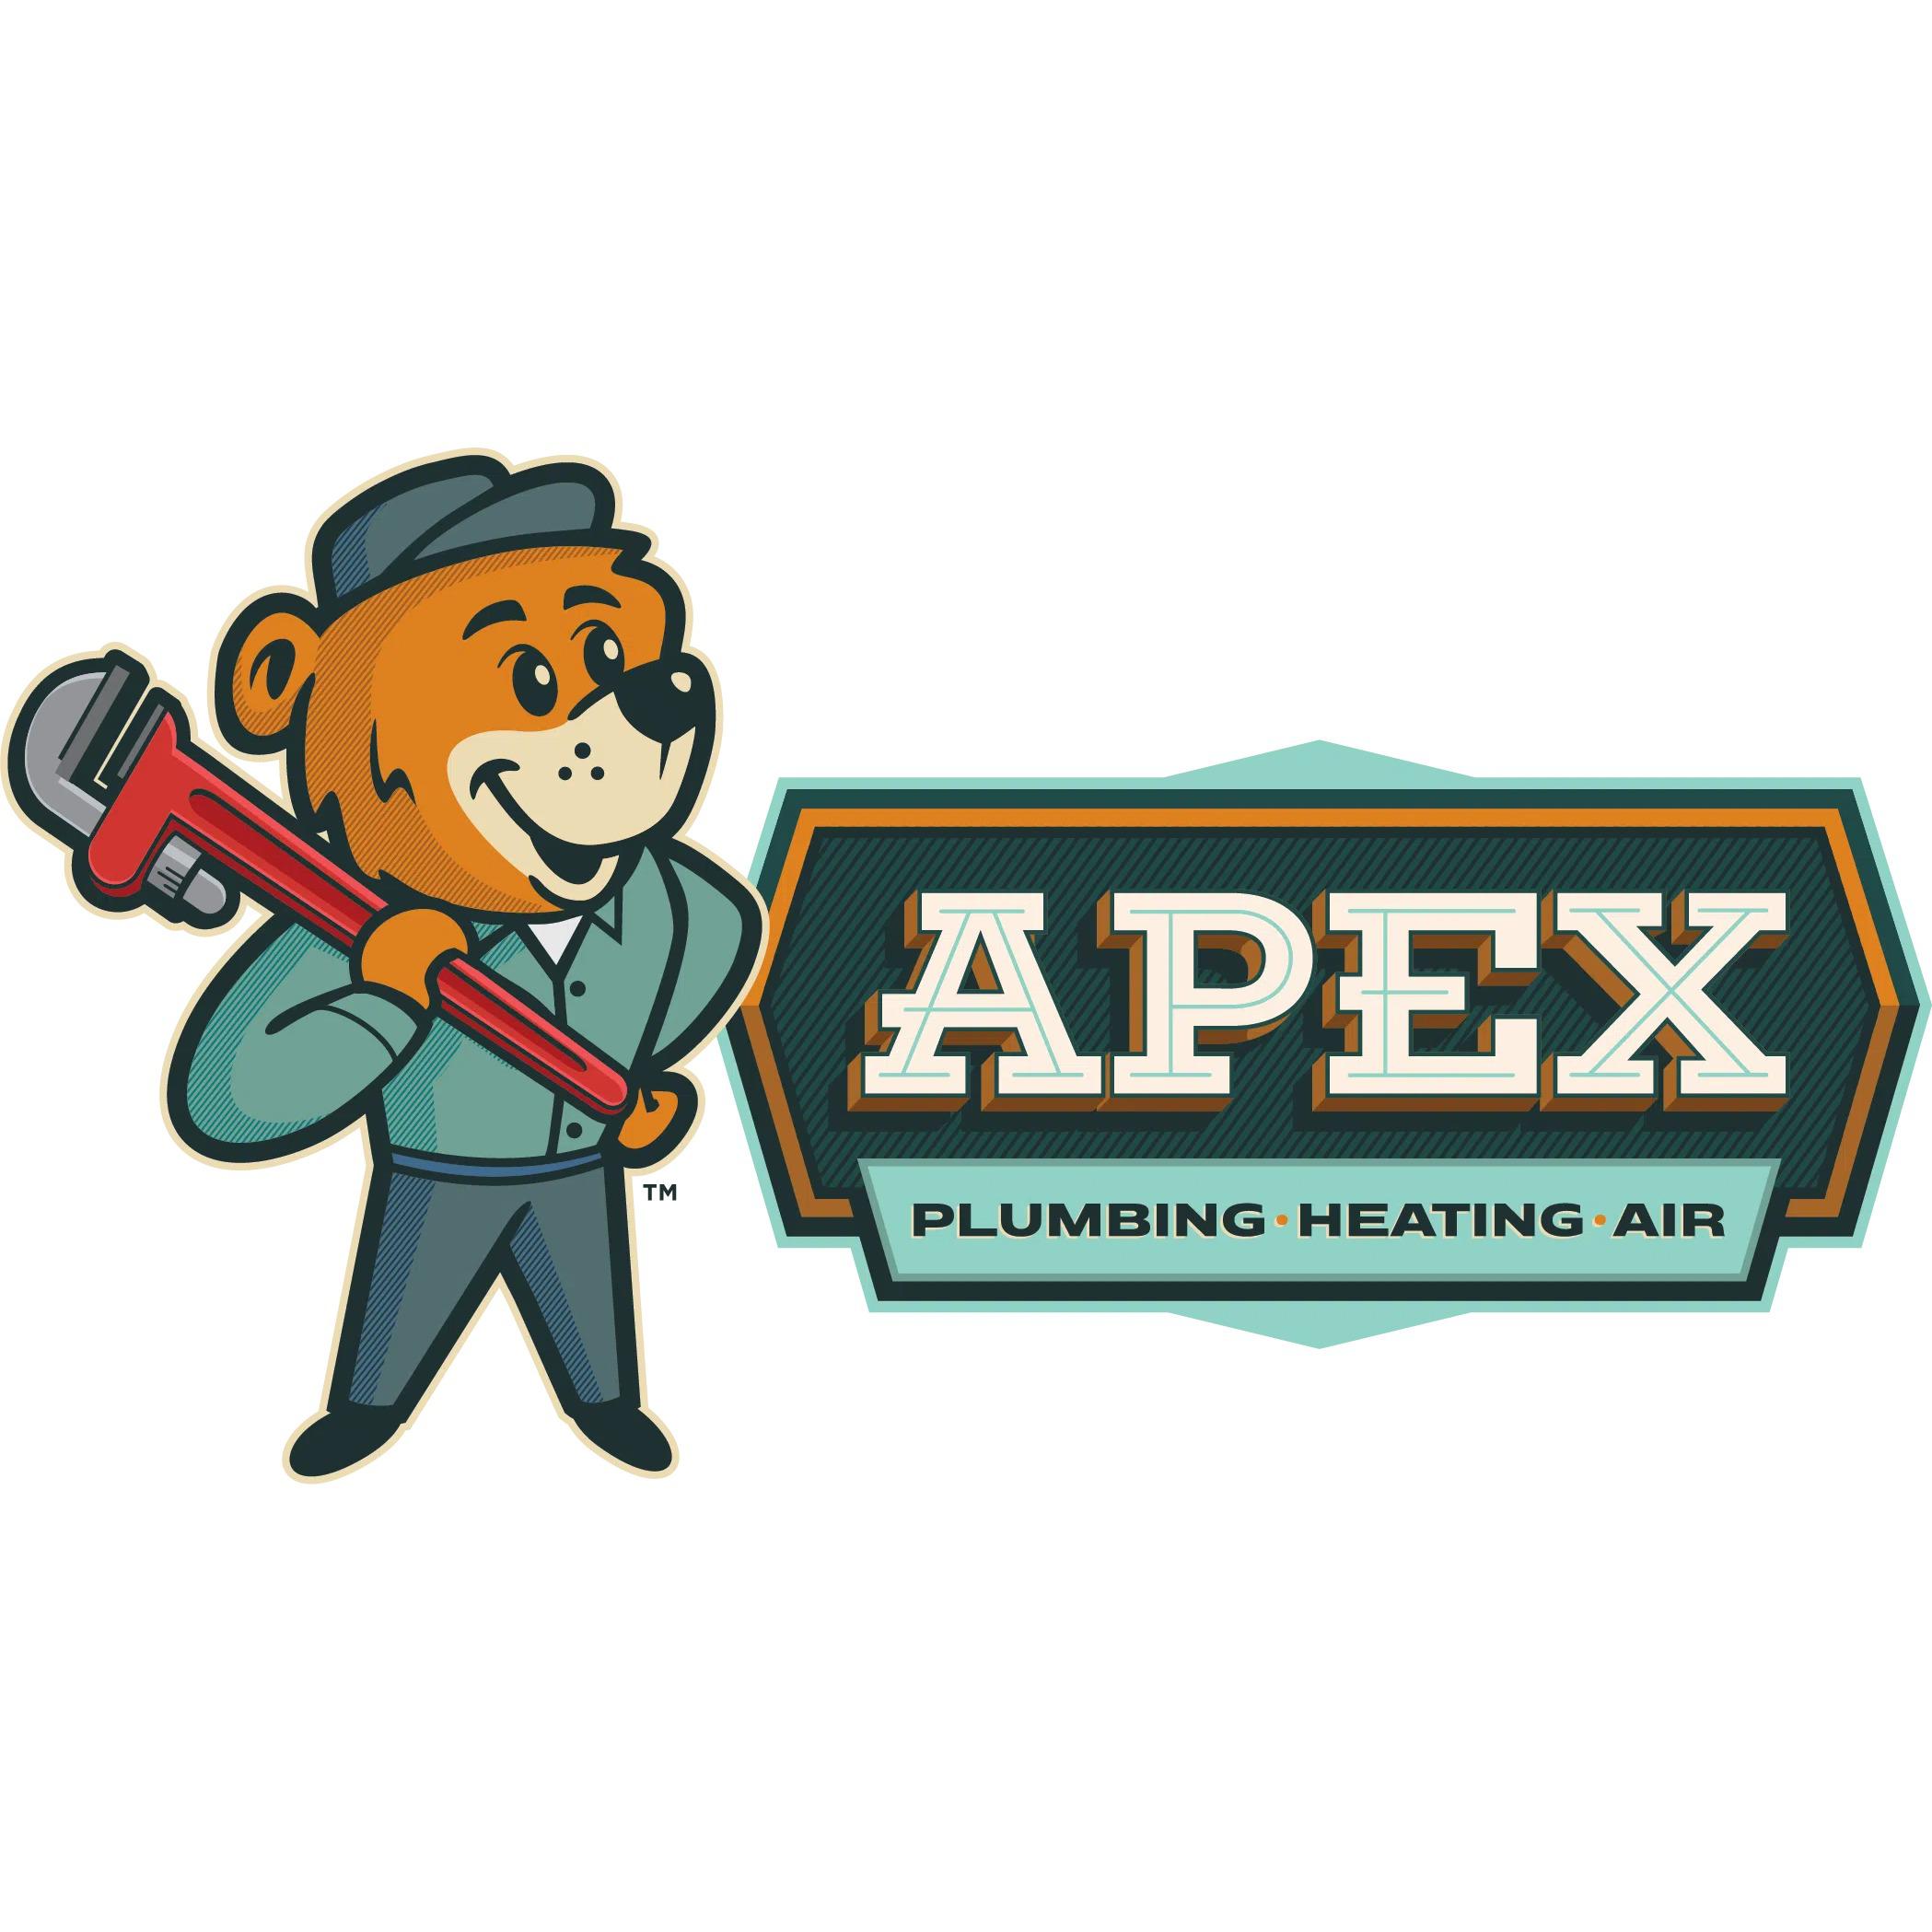 Apex Plumbing, Heating, and Air Pros - Lancaster, OH 43130 - (740)677-6570 | ShowMeLocal.com